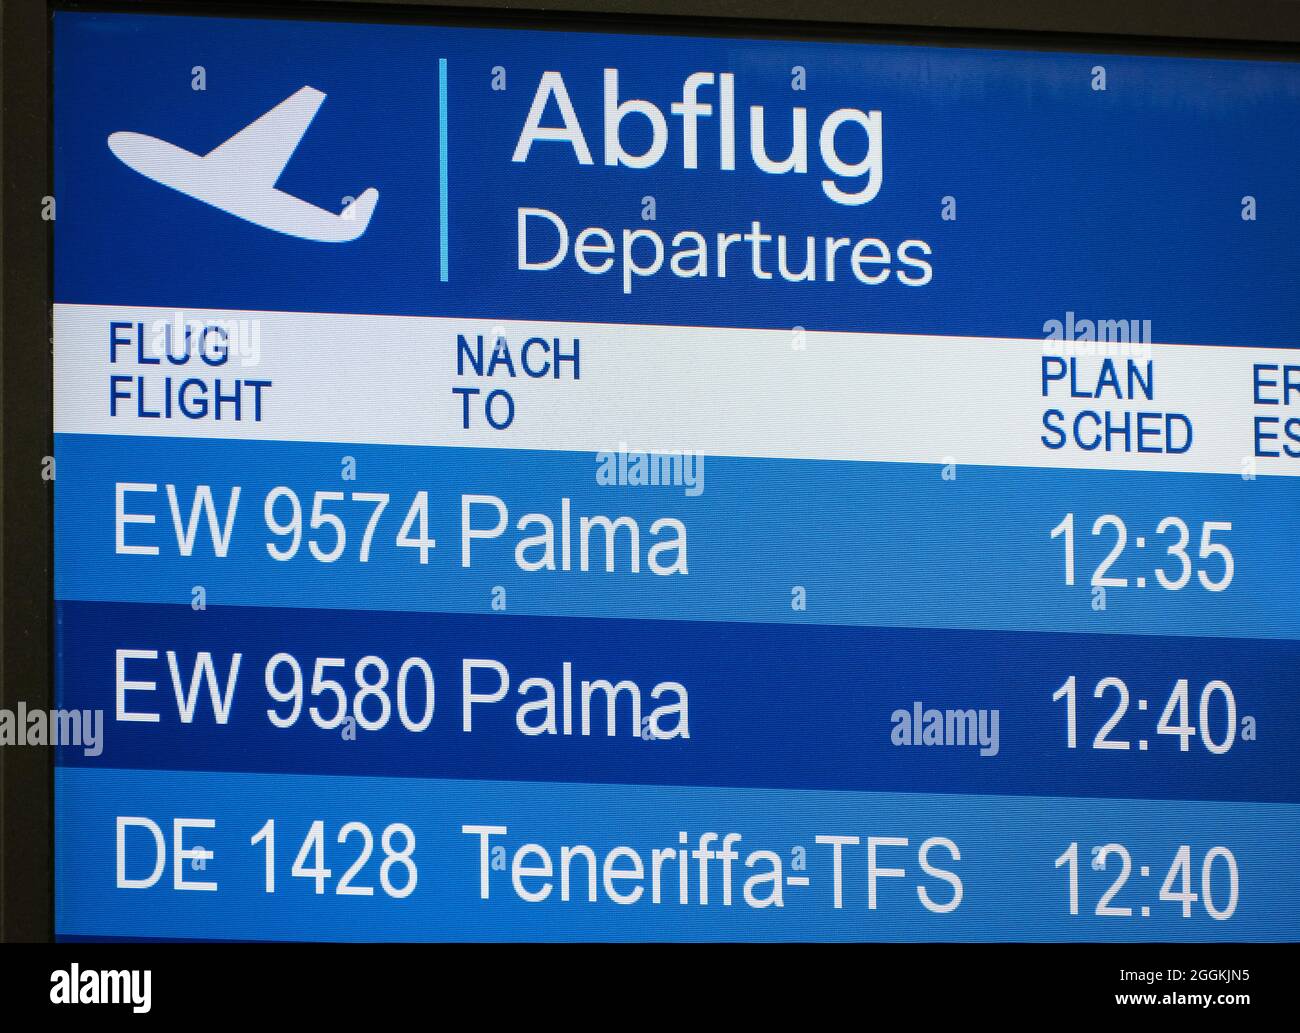 Duesseldorf, North Rhine-Westphalia, Germany - Duesseldorf Airport, holiday start in NRW, departure to Mallorca, display board shows departures to Palma and Tenerife, summer vacation in times of the corona pandemic. Stock Photo